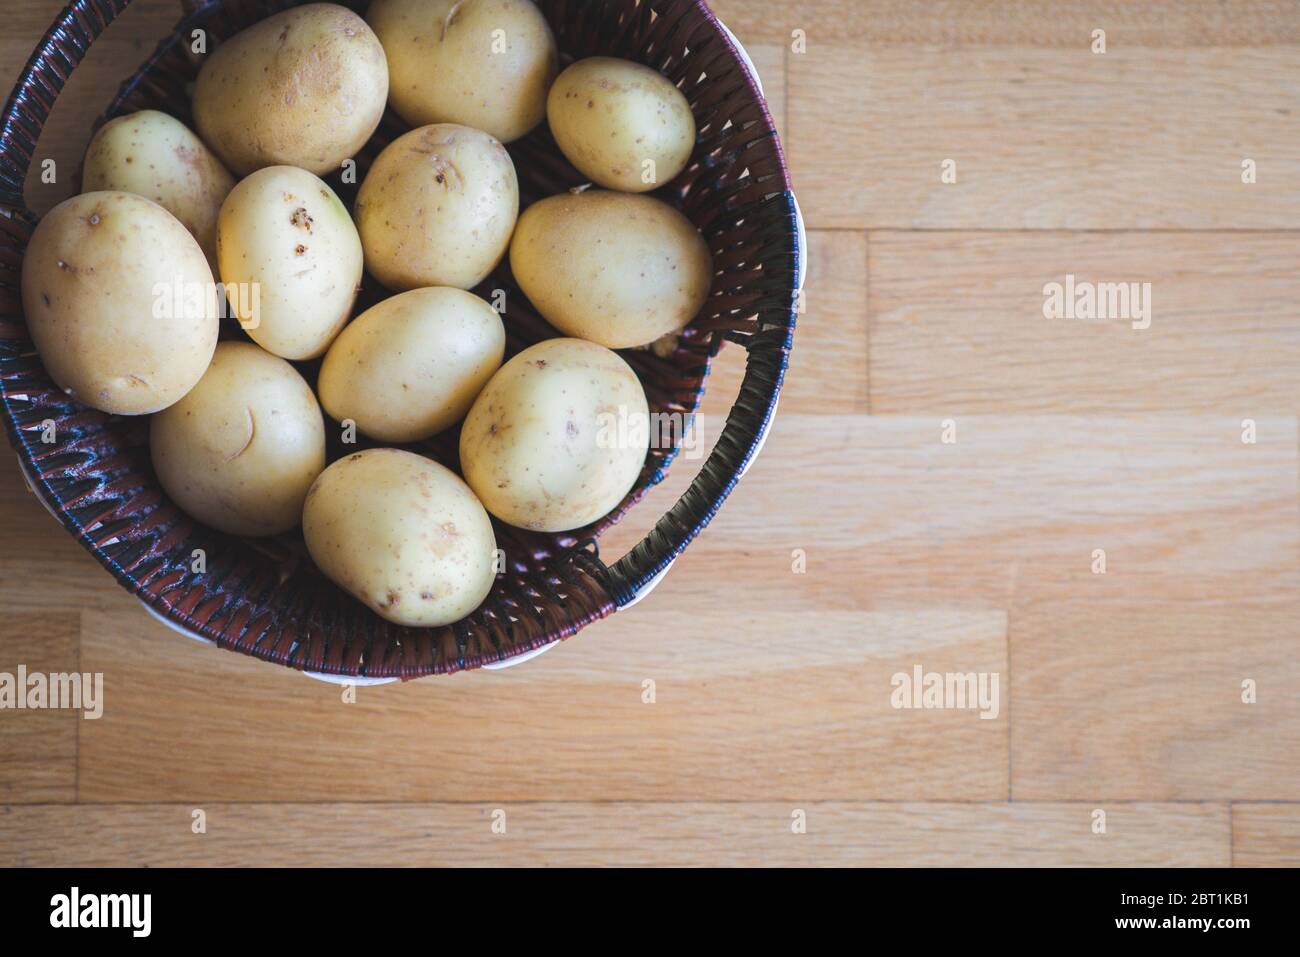 Potatoes in a wicker basket. Potato tubers in wicker dishes and scattered on the table. Potato harvest. Vegetables for a healthy diet. Stock Photo